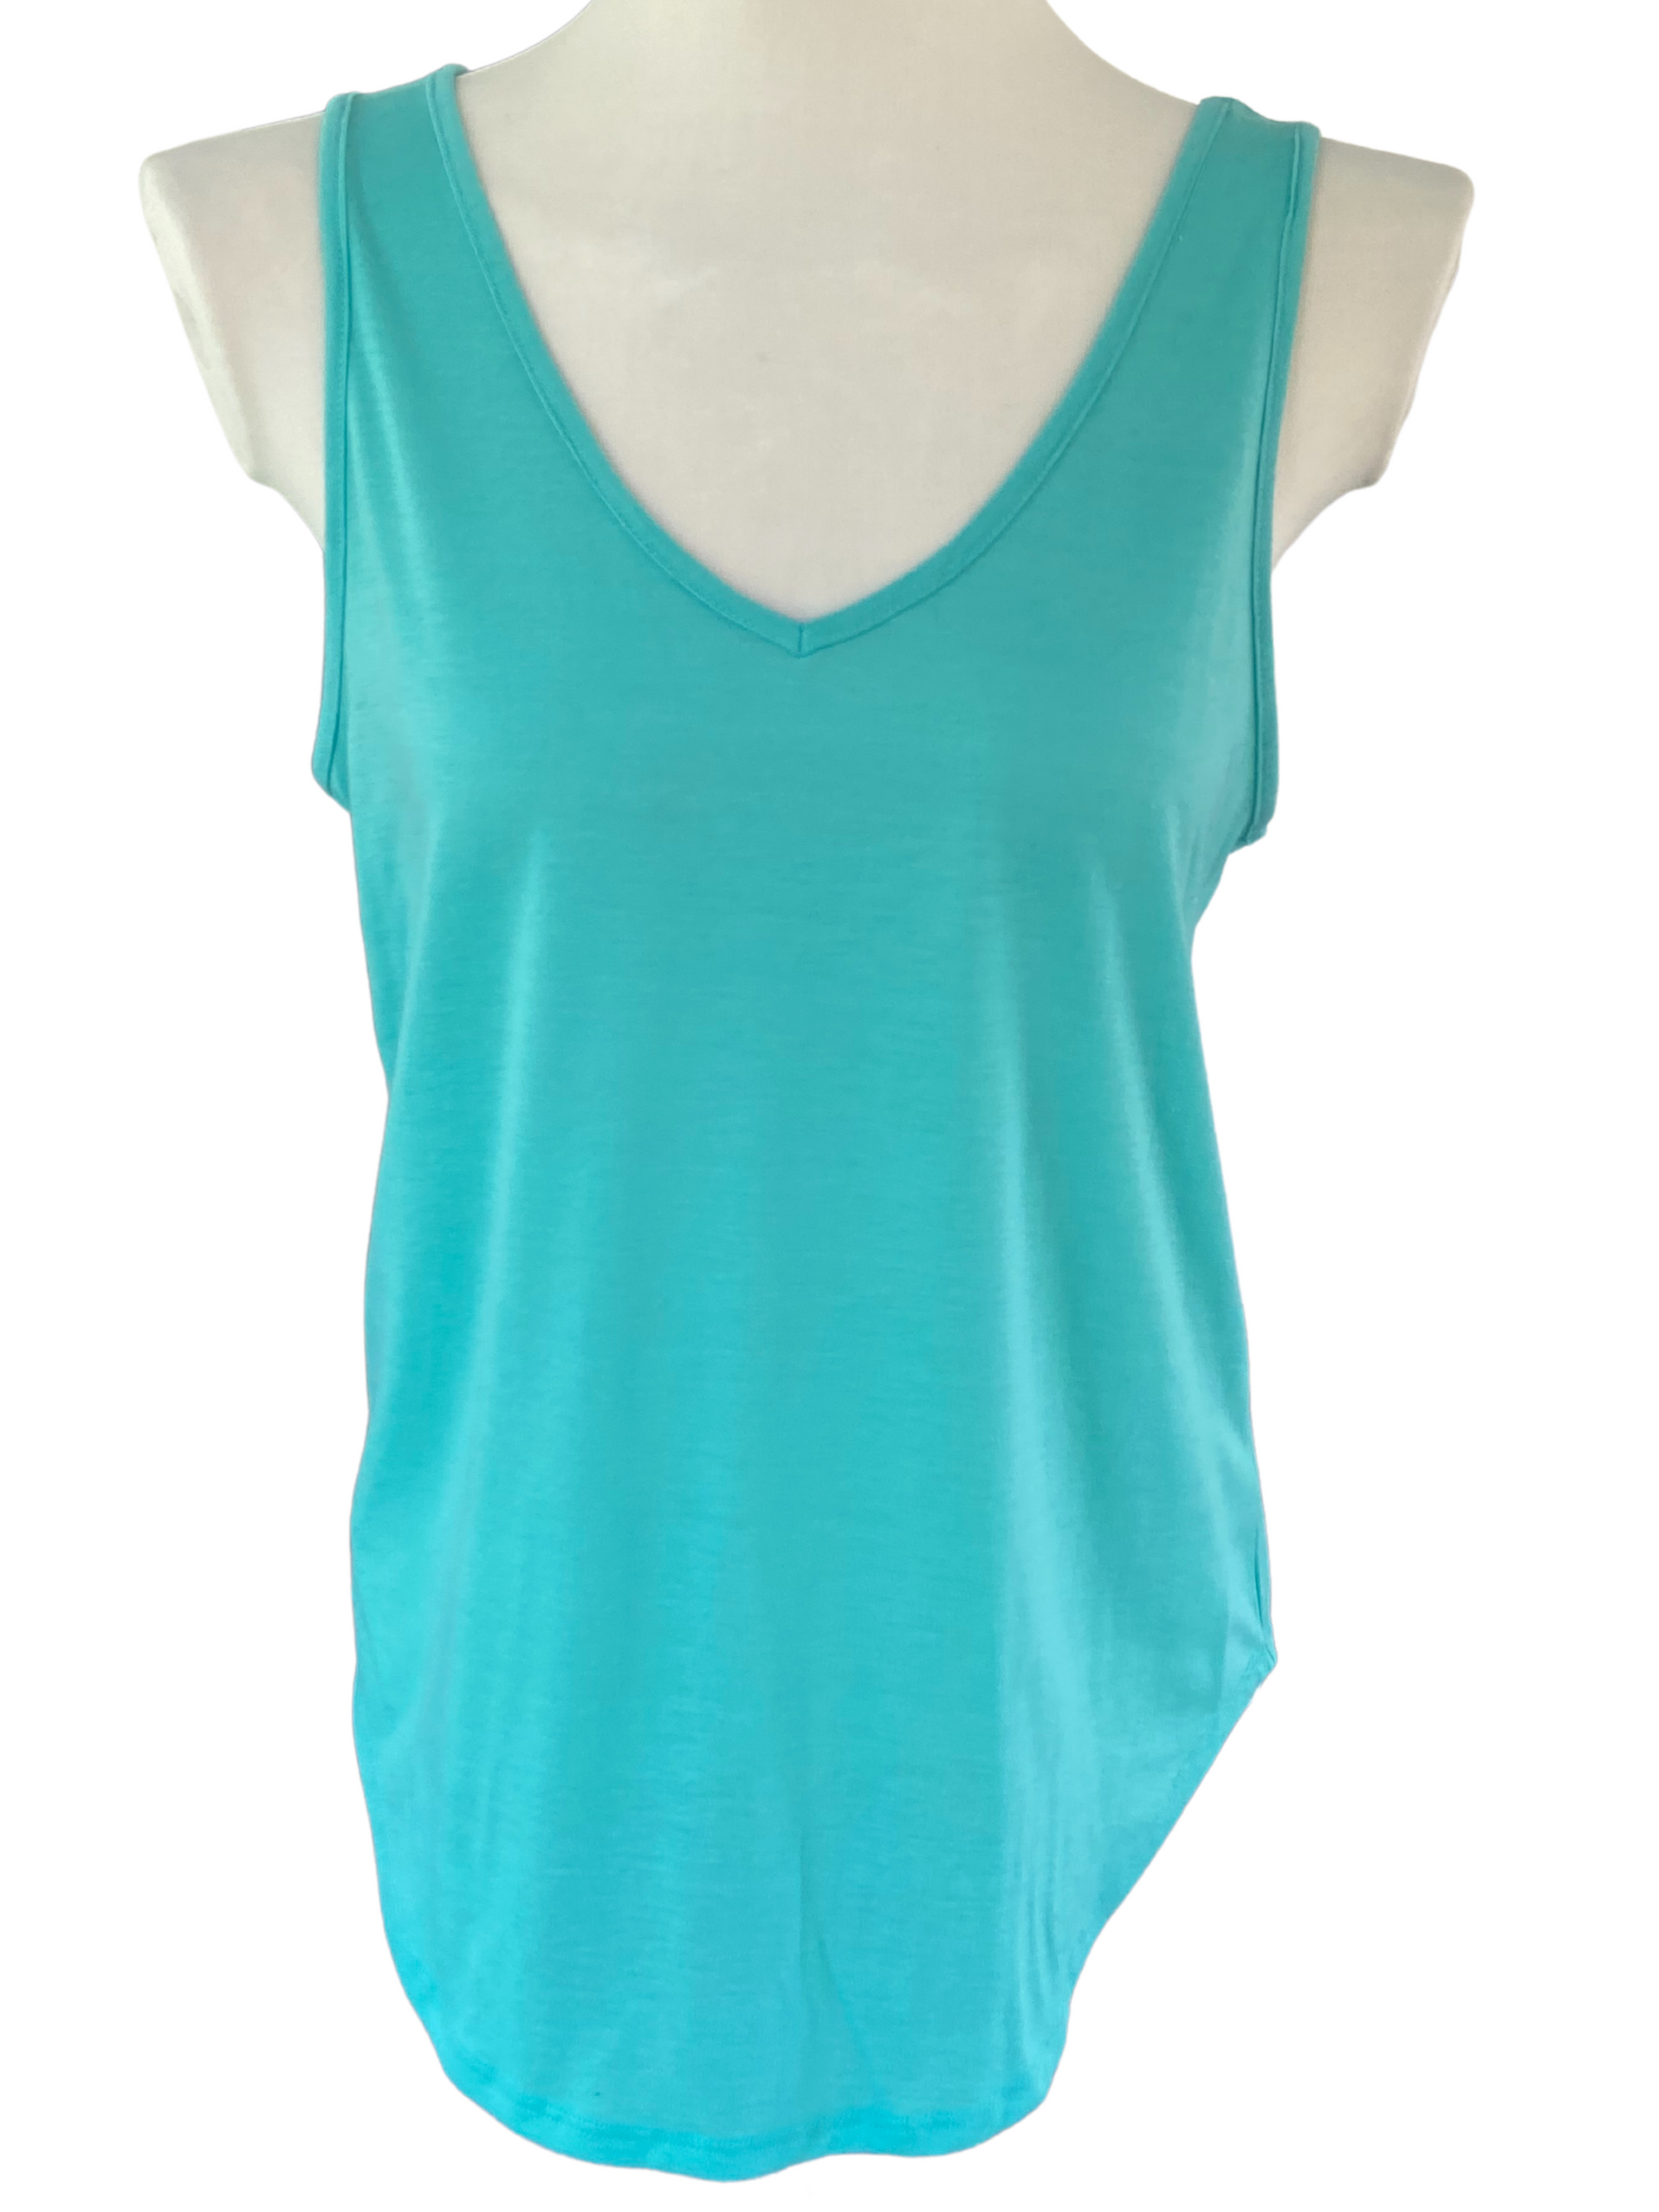 Cool Summer mint double v-neck tank top